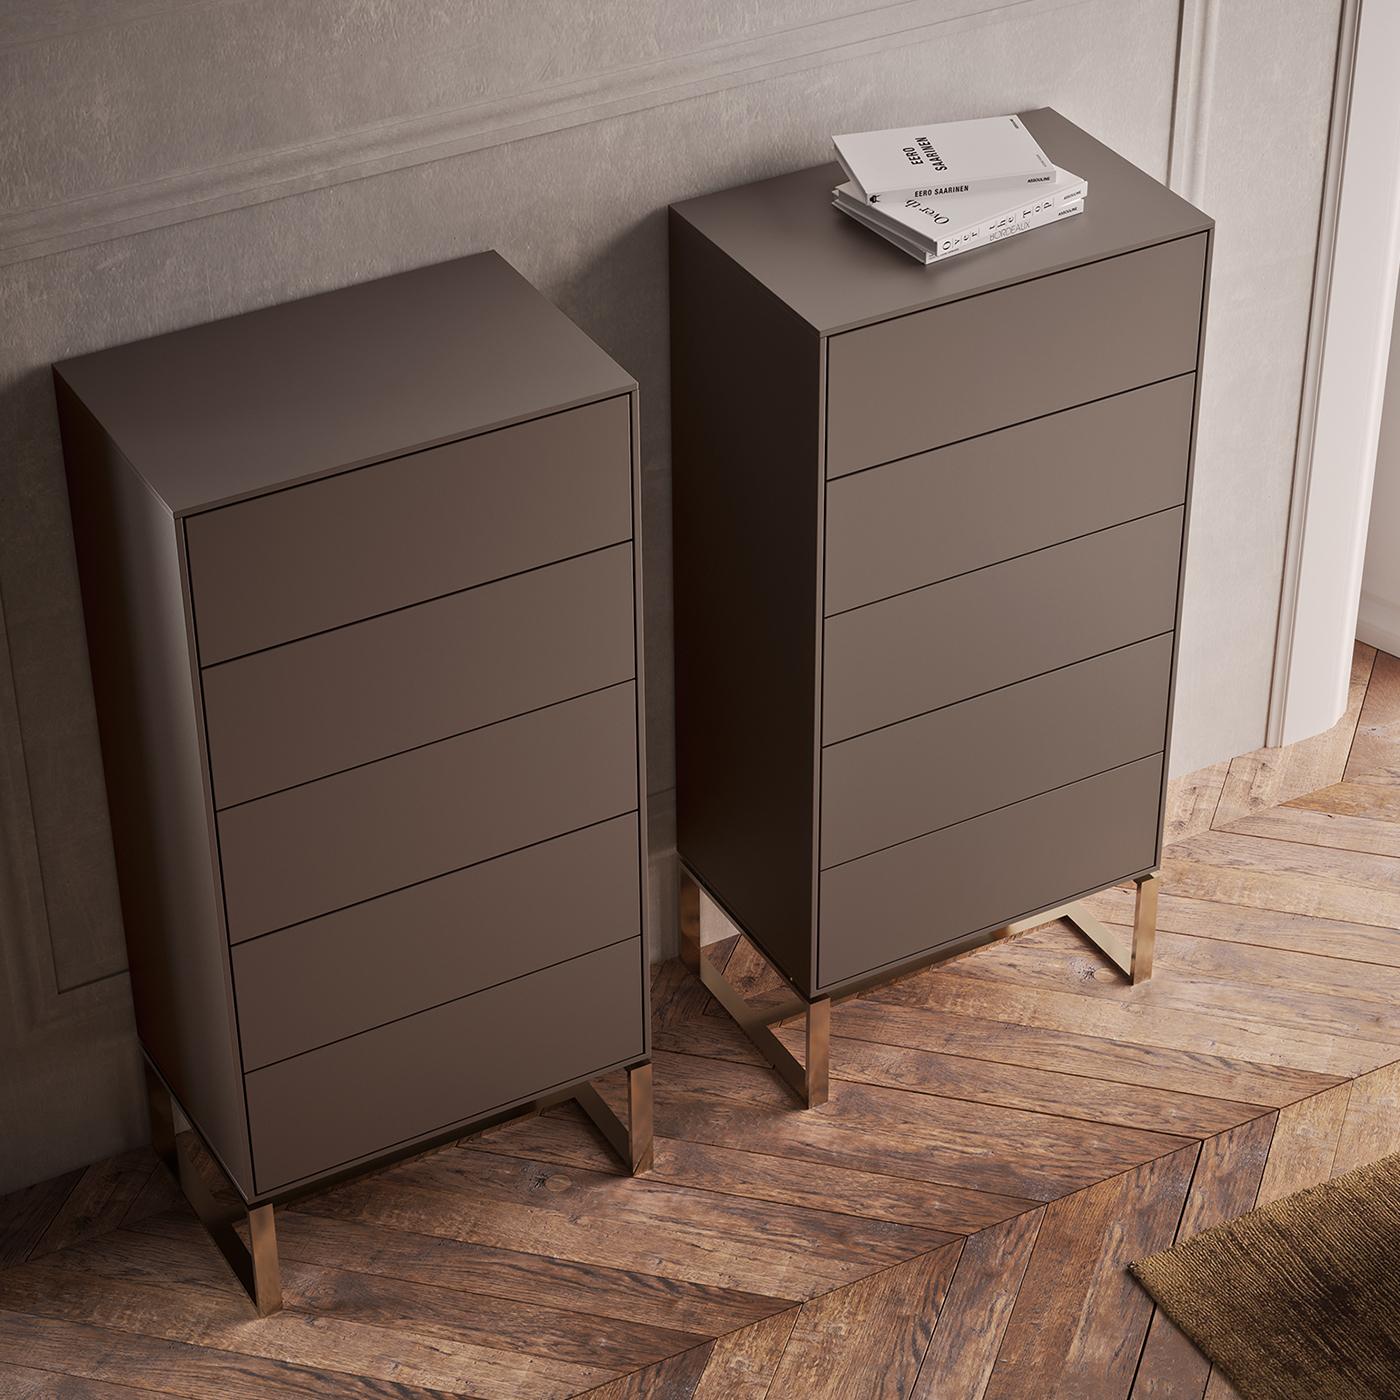 A sleek solution offering ample storage space, this chest of drawers stands out for its rigorous silhouette in gray-lacquered MDF. Organized in five drawers equipped with a soft-close system, the storage unit towers over the open steel base are